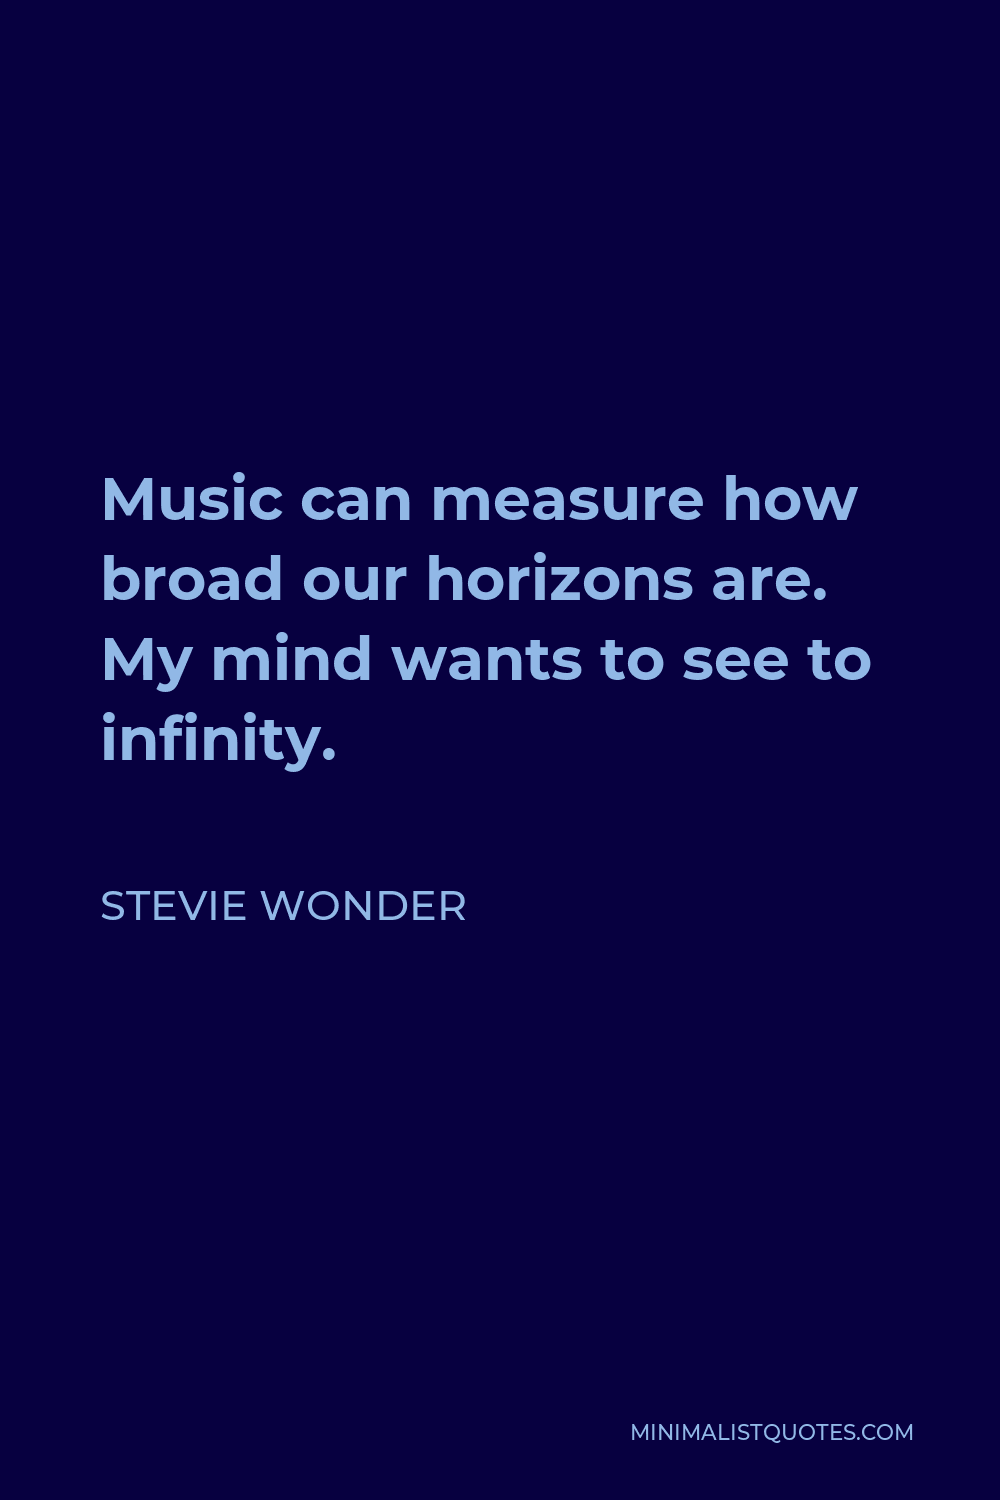 Stevie Wonder Quote - Music can measure how broad our horizons are. My mind wants to see to infinity.